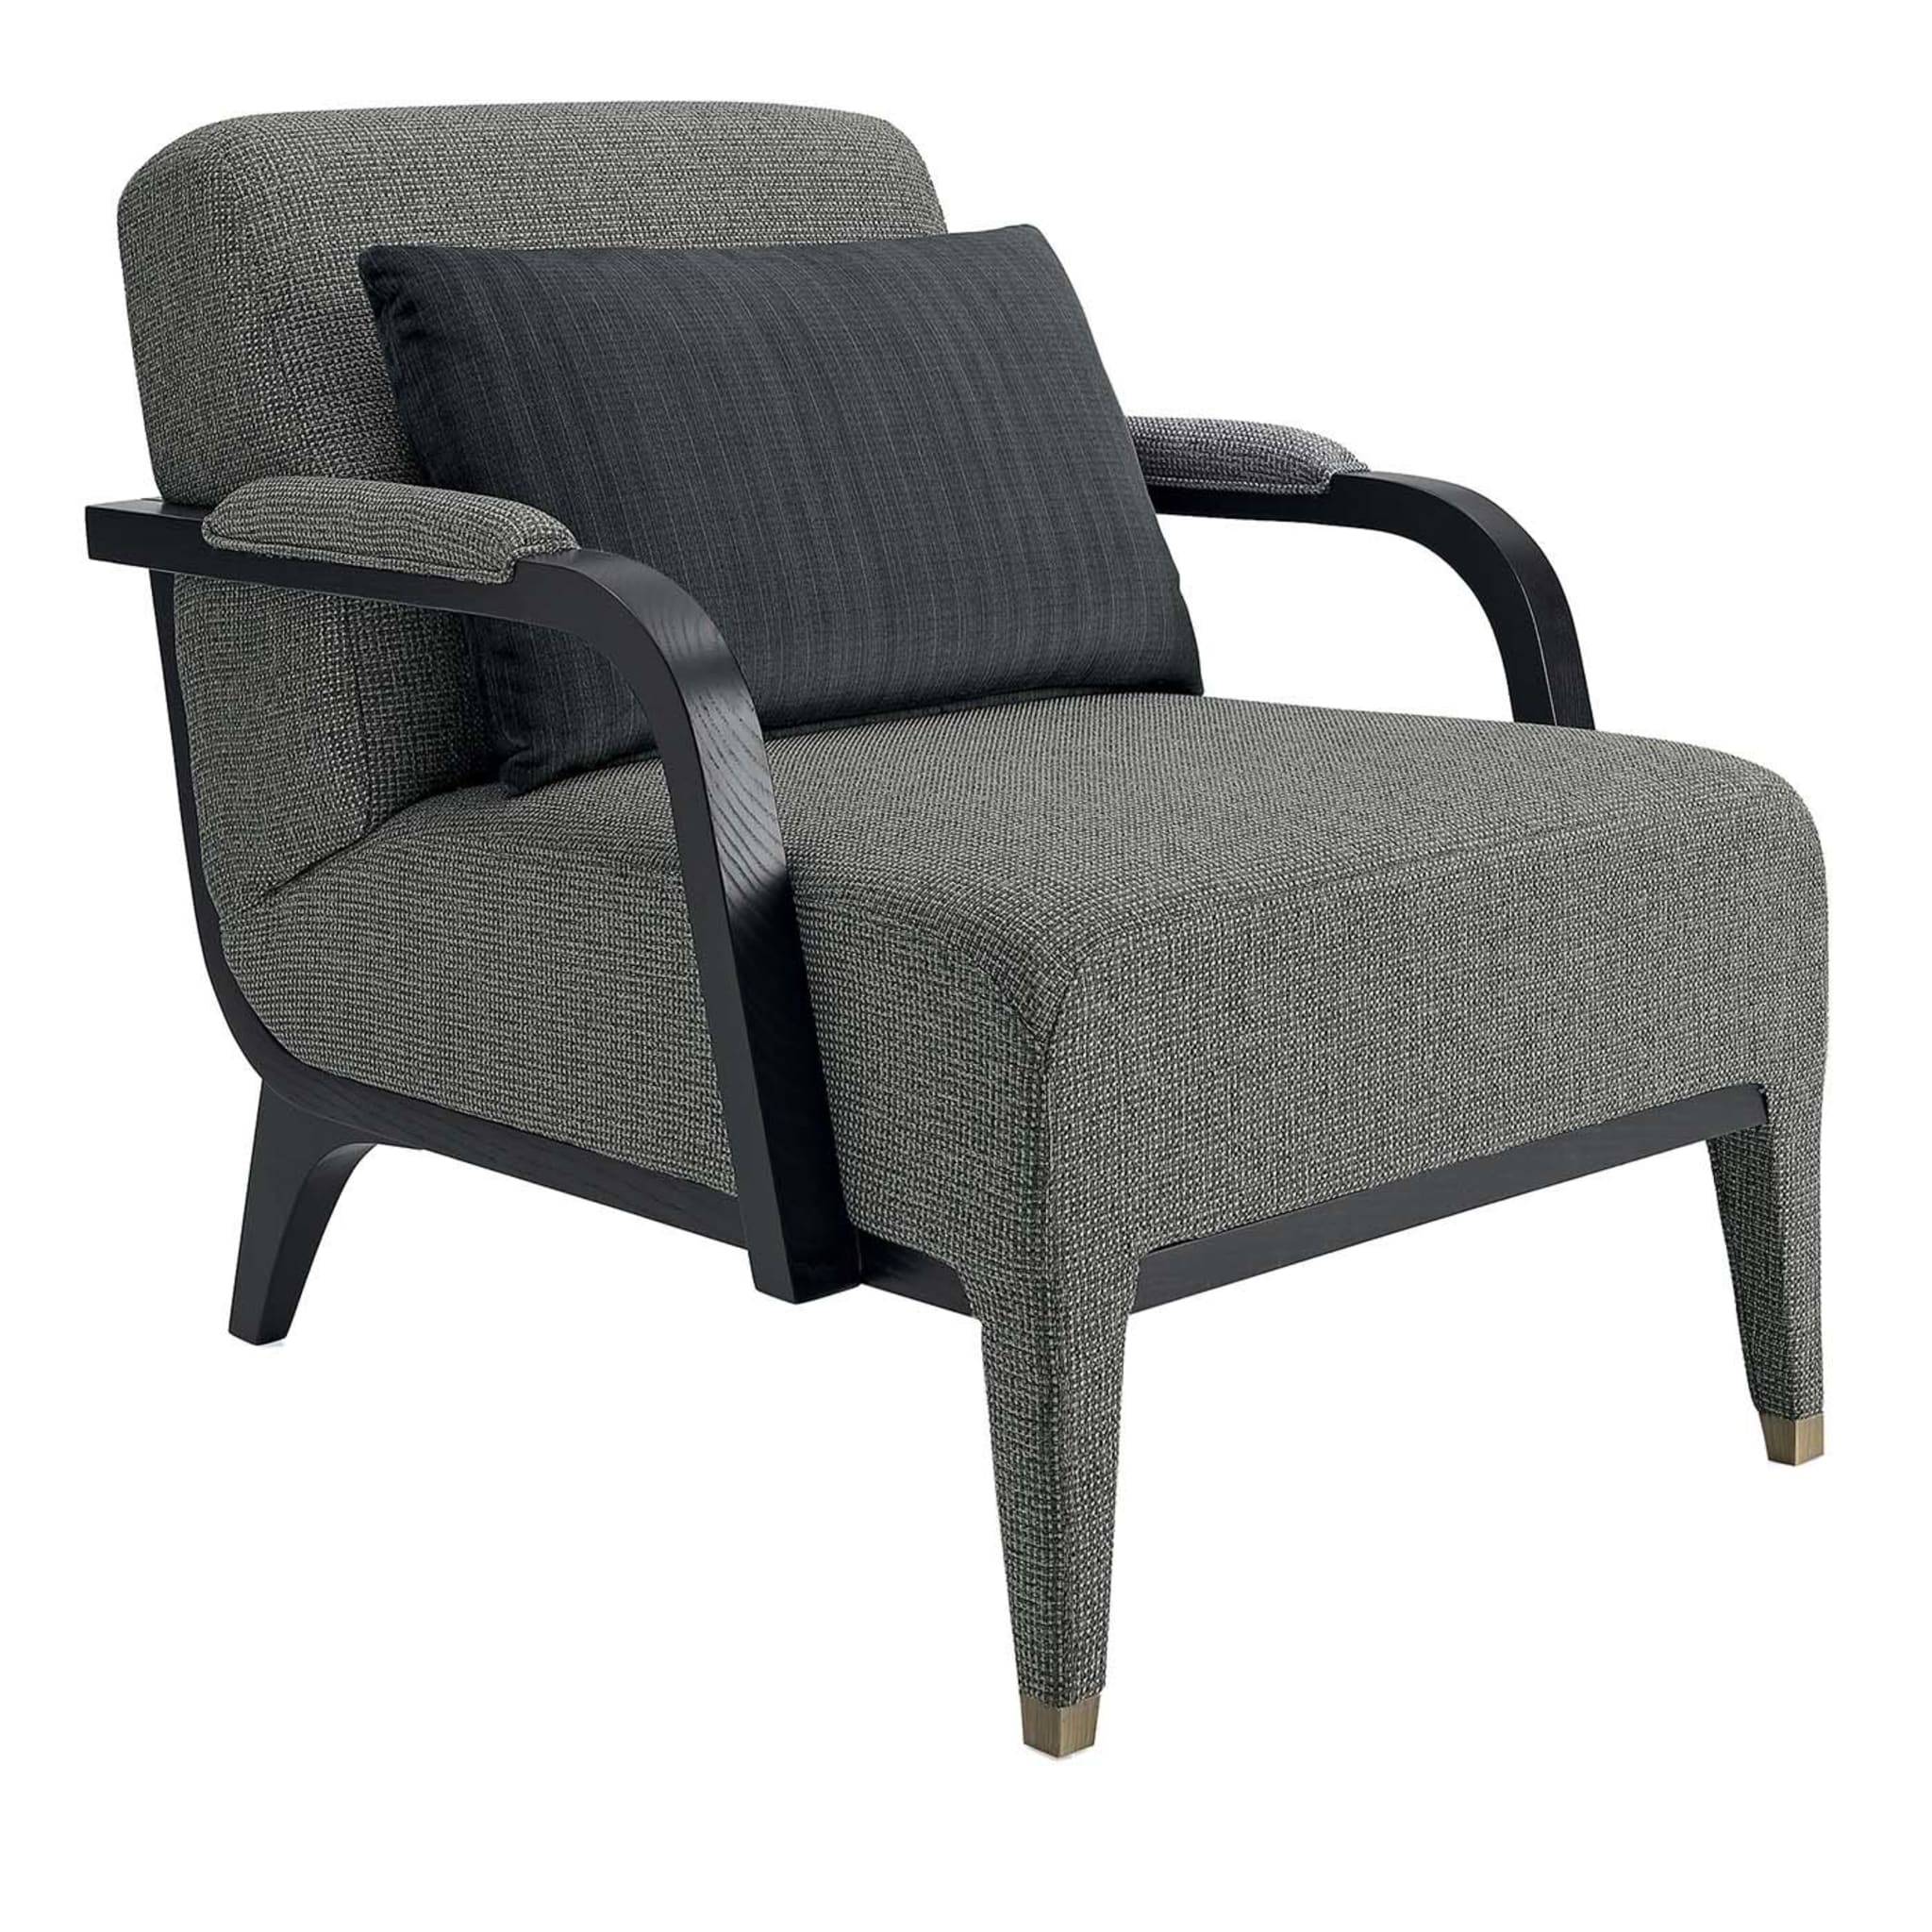 Black and Gray Armchair - Main view